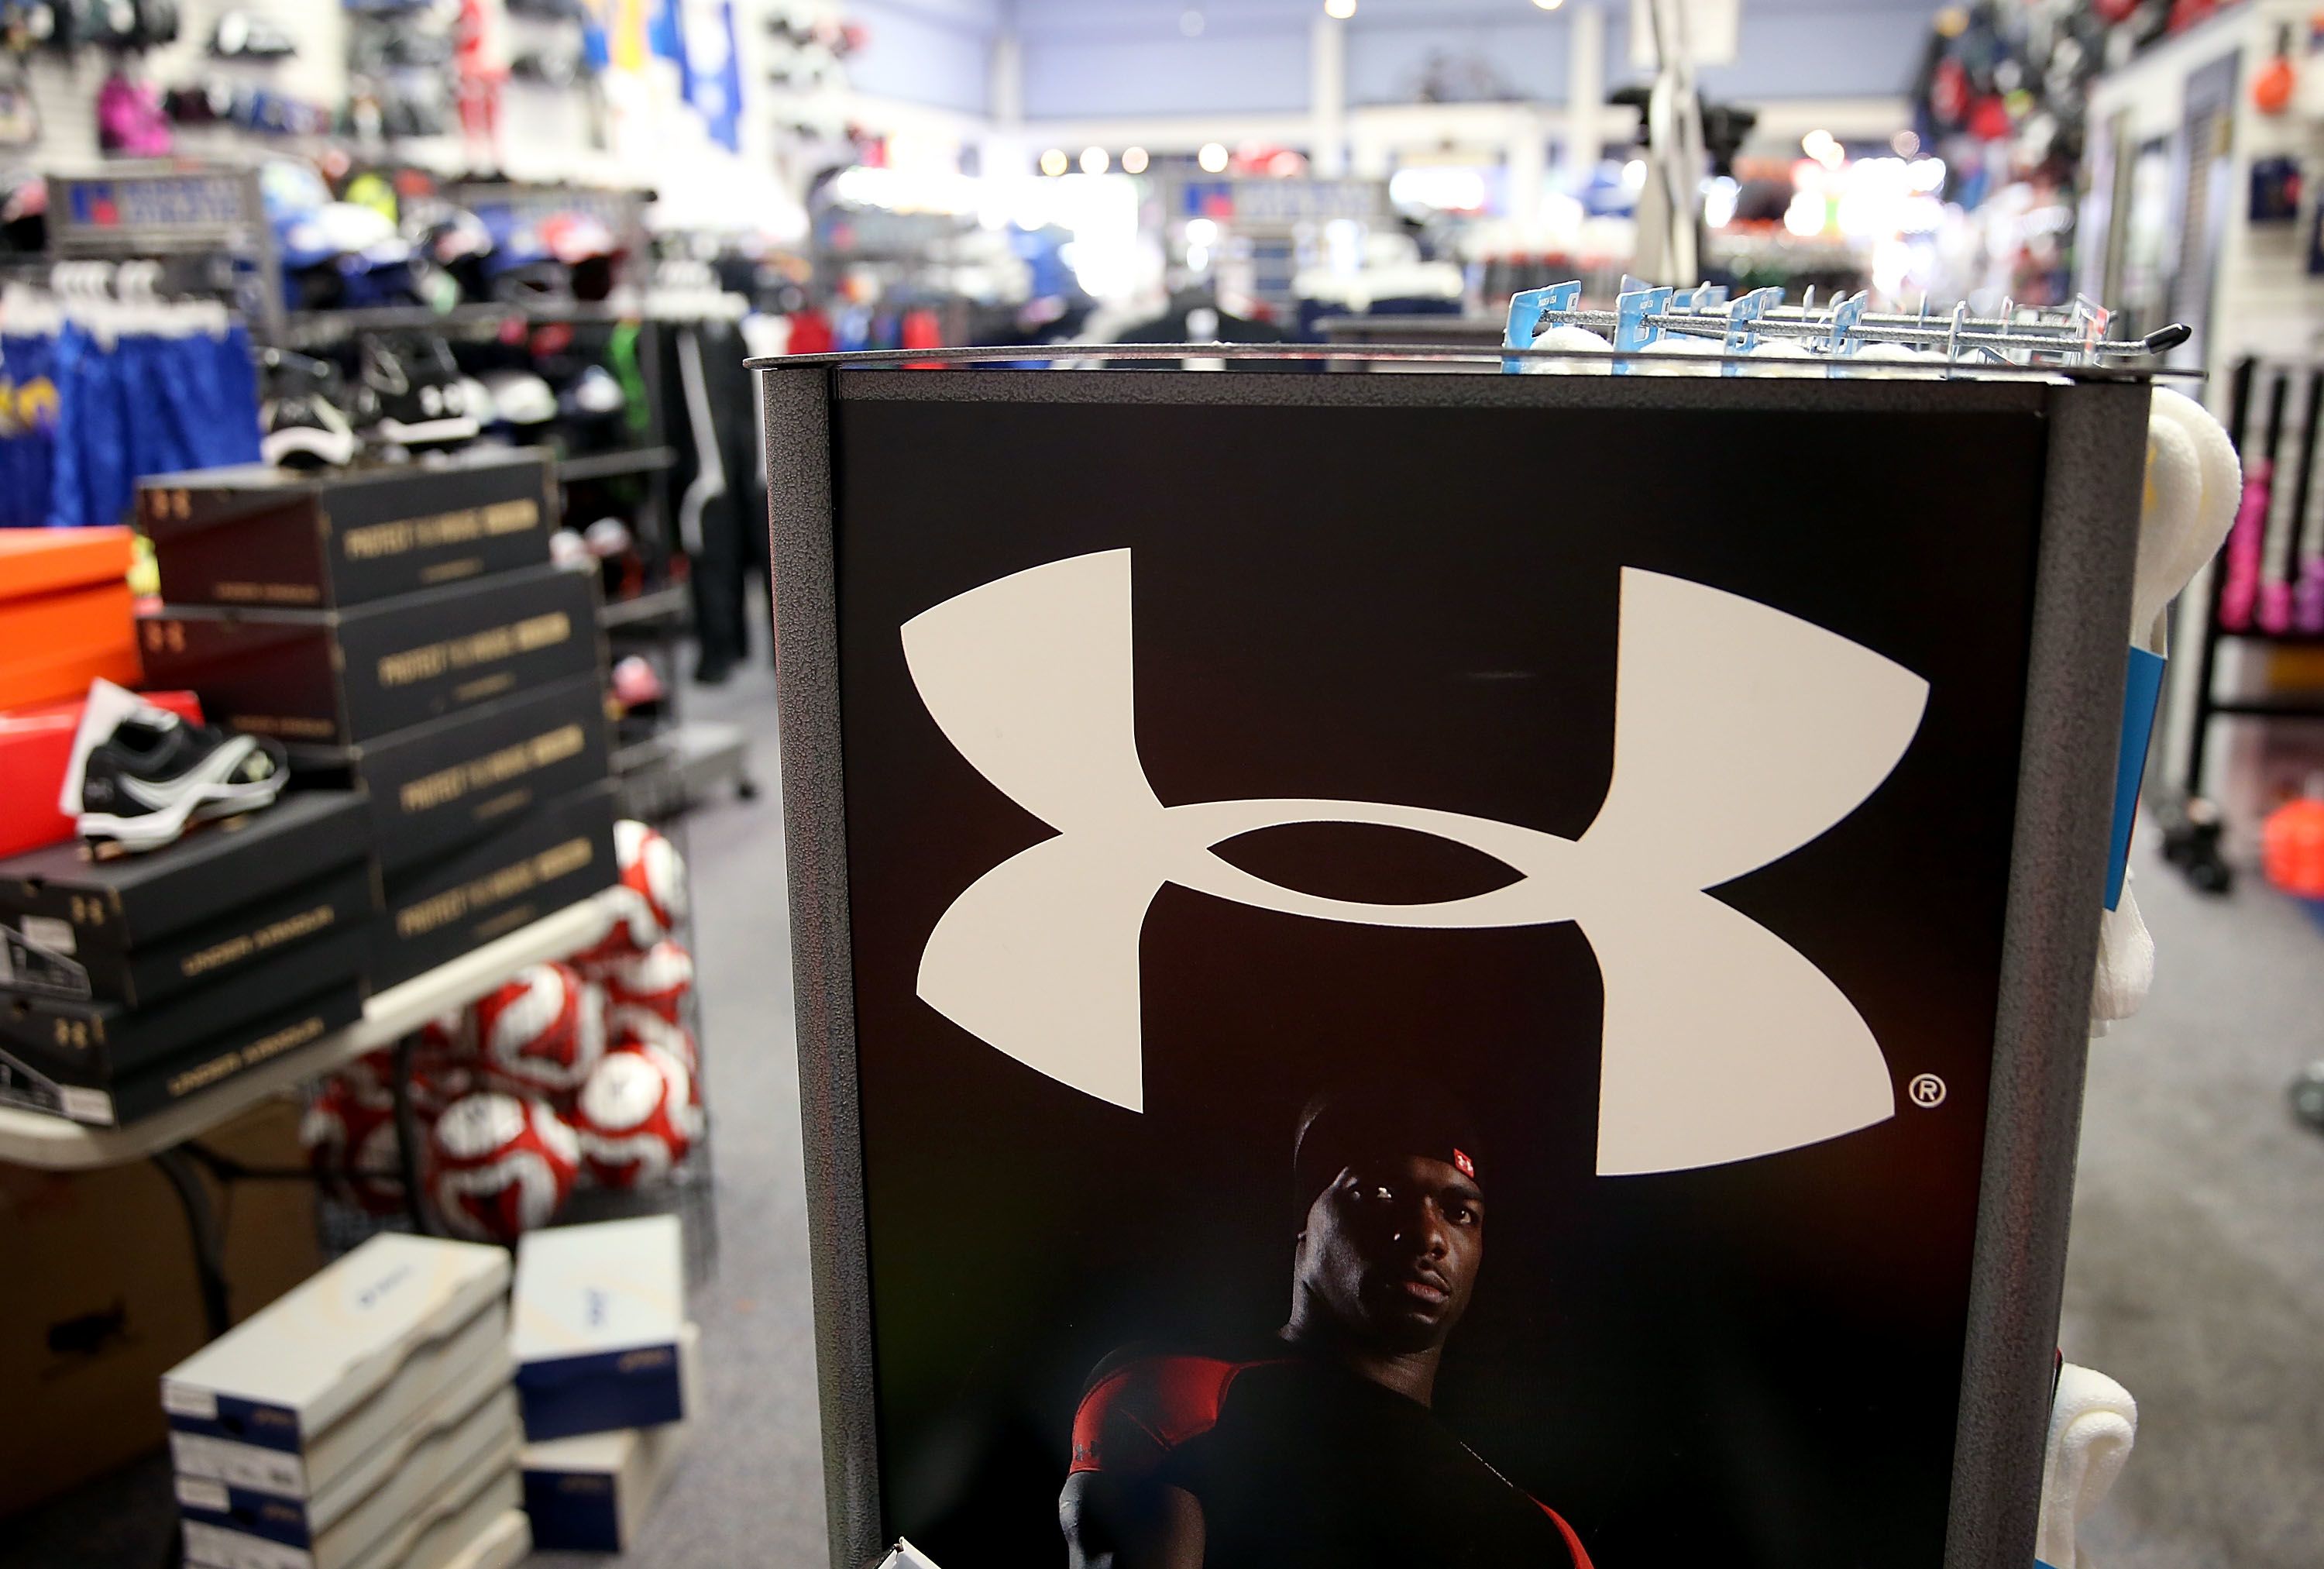 What Investors Need to Know About Under Armour's Global Retail